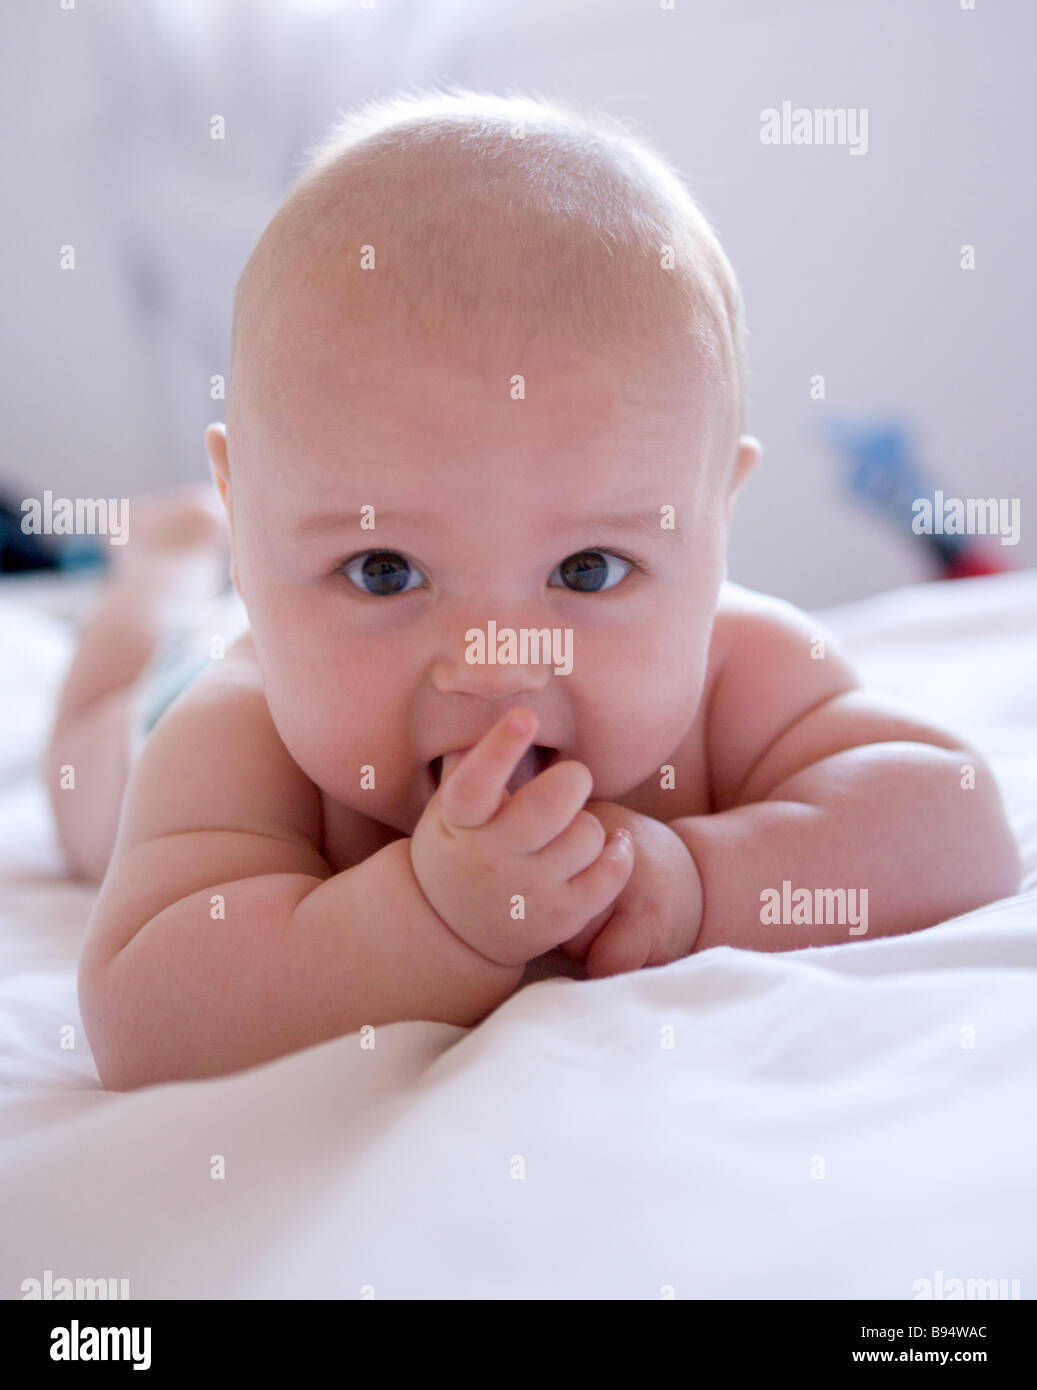 Small baby chuckling on a bed with window light behind him Stock Photo